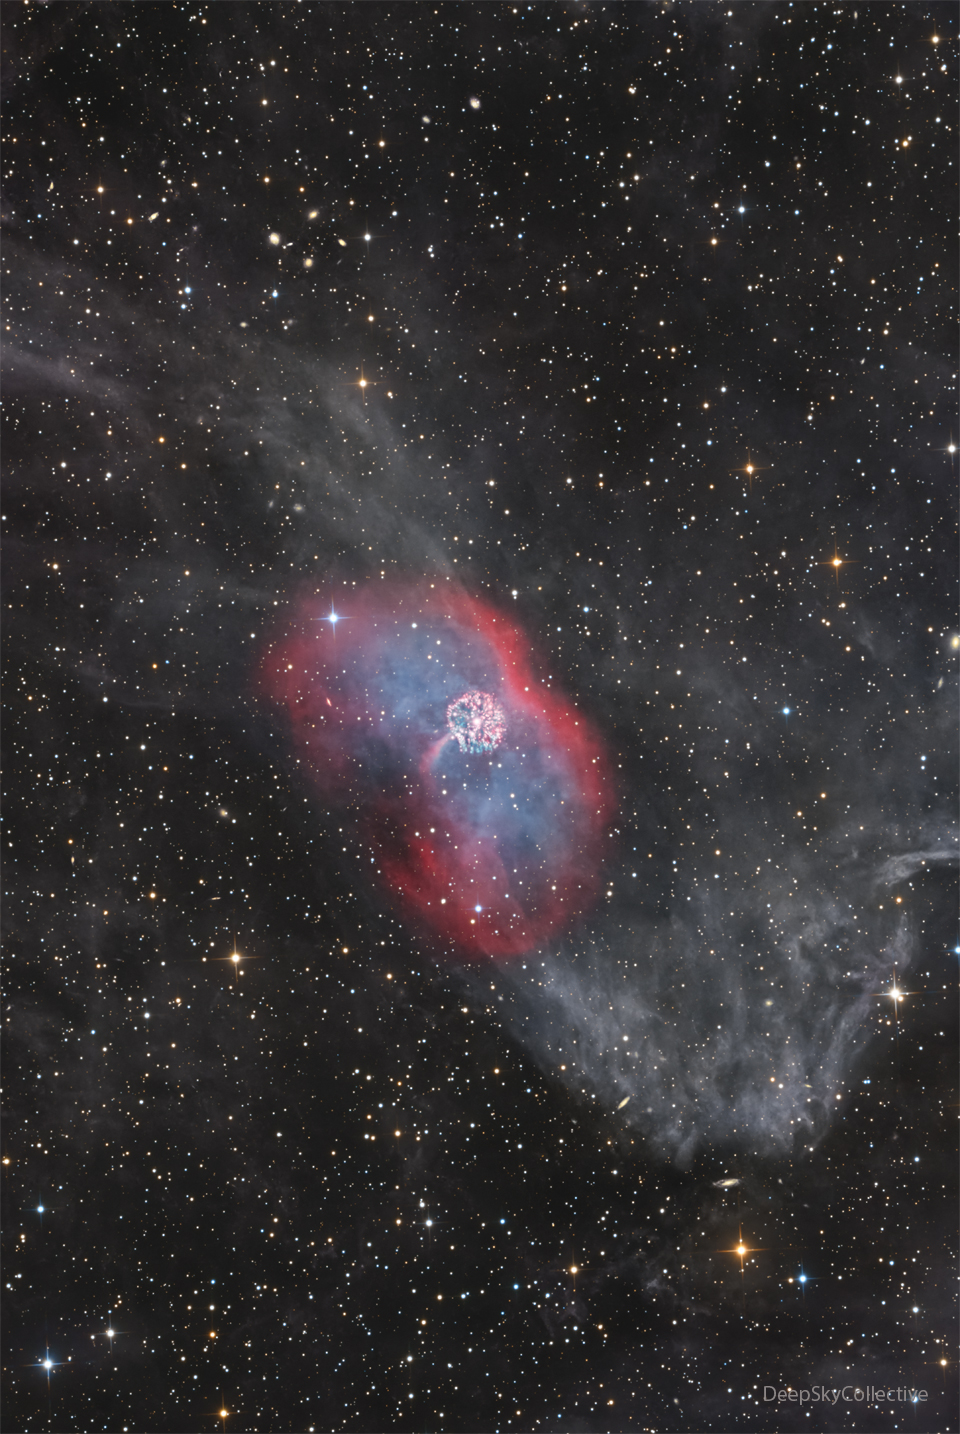 A faint nebula runs vertically in the image. In the
centre is a red envelope surrounding diffuse blue emission.
In the centre is a bright multicoloured nebula that is 
nearly circular. 
Please see the explanation for more detailed information.